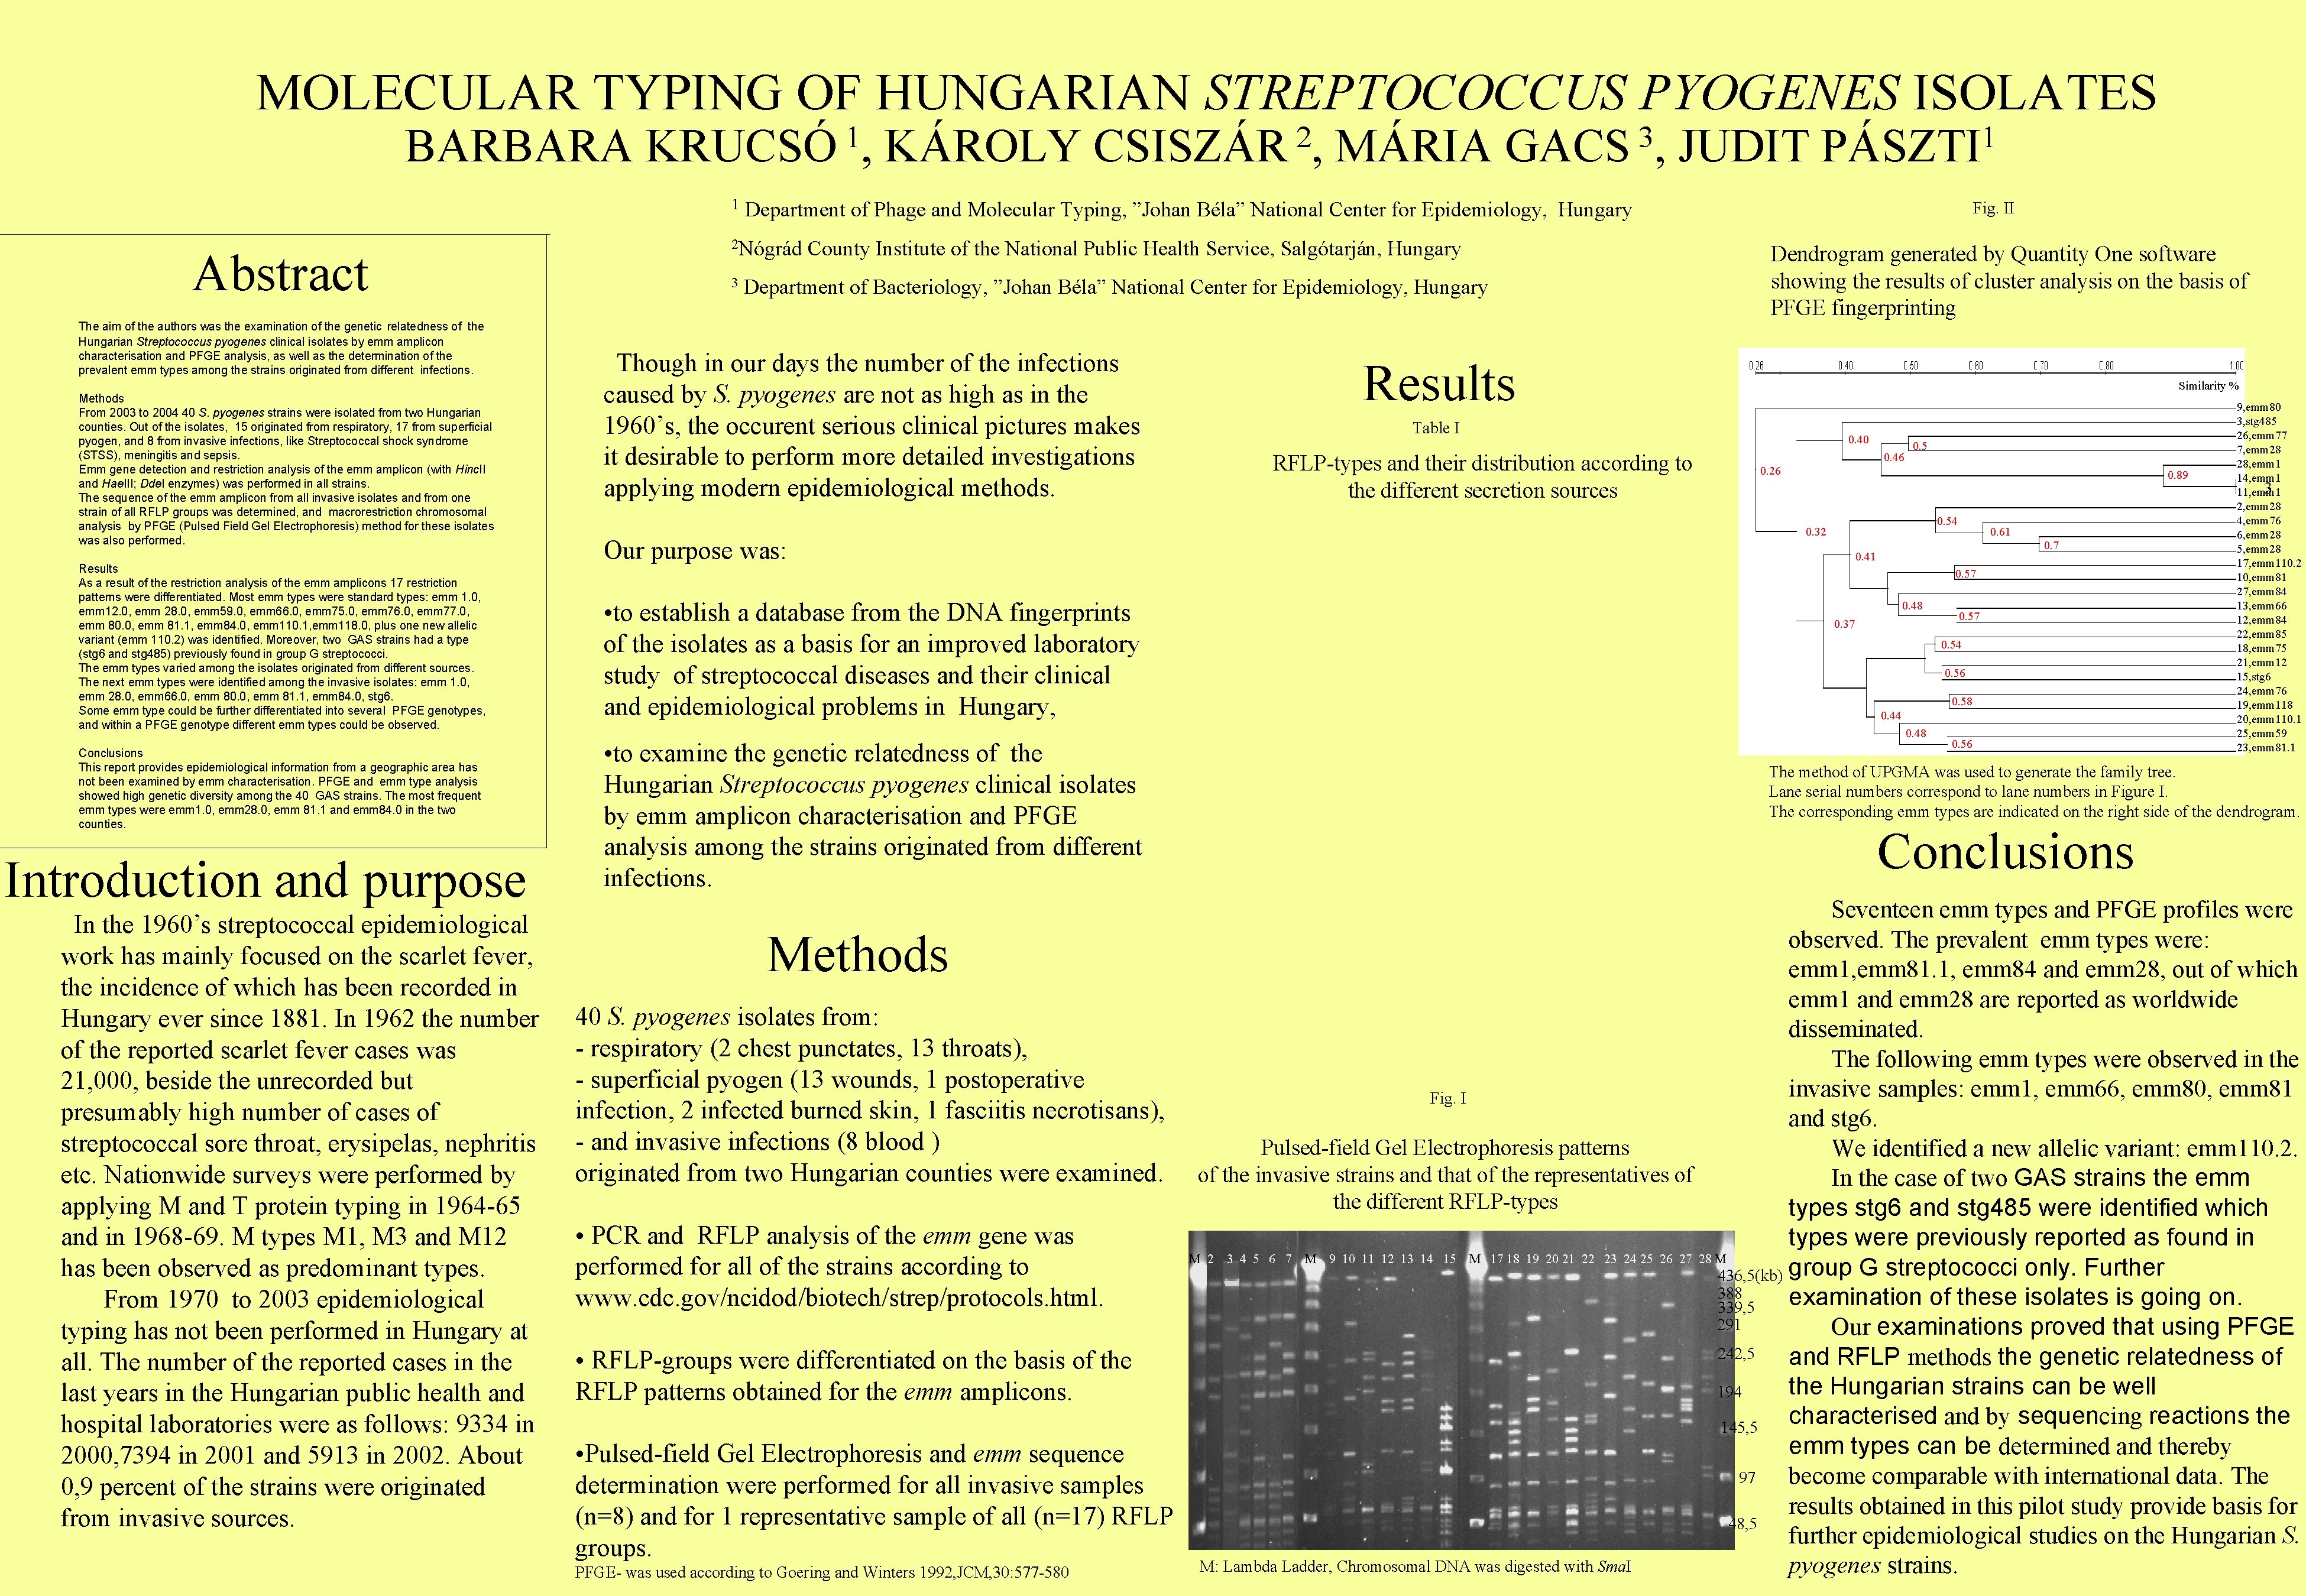 MOLECULAR TYPING OF HUNGARIAN STREPTOCOCCUS PYOGENES ISOLATES BARBARA 1 KRUCSÓ , 1 Abstract The